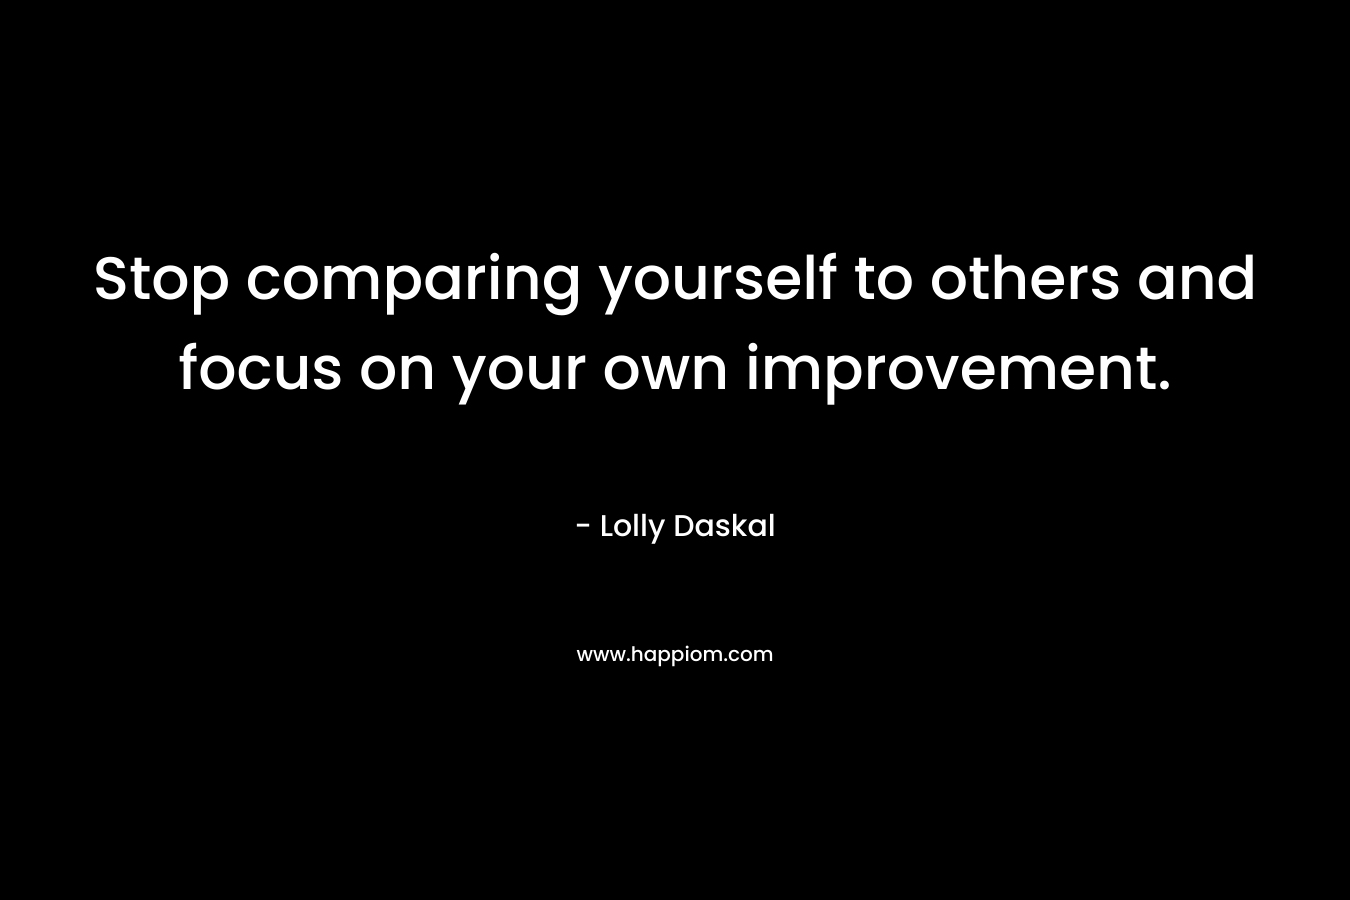 Stop comparing yourself to others and focus on your own improvement.